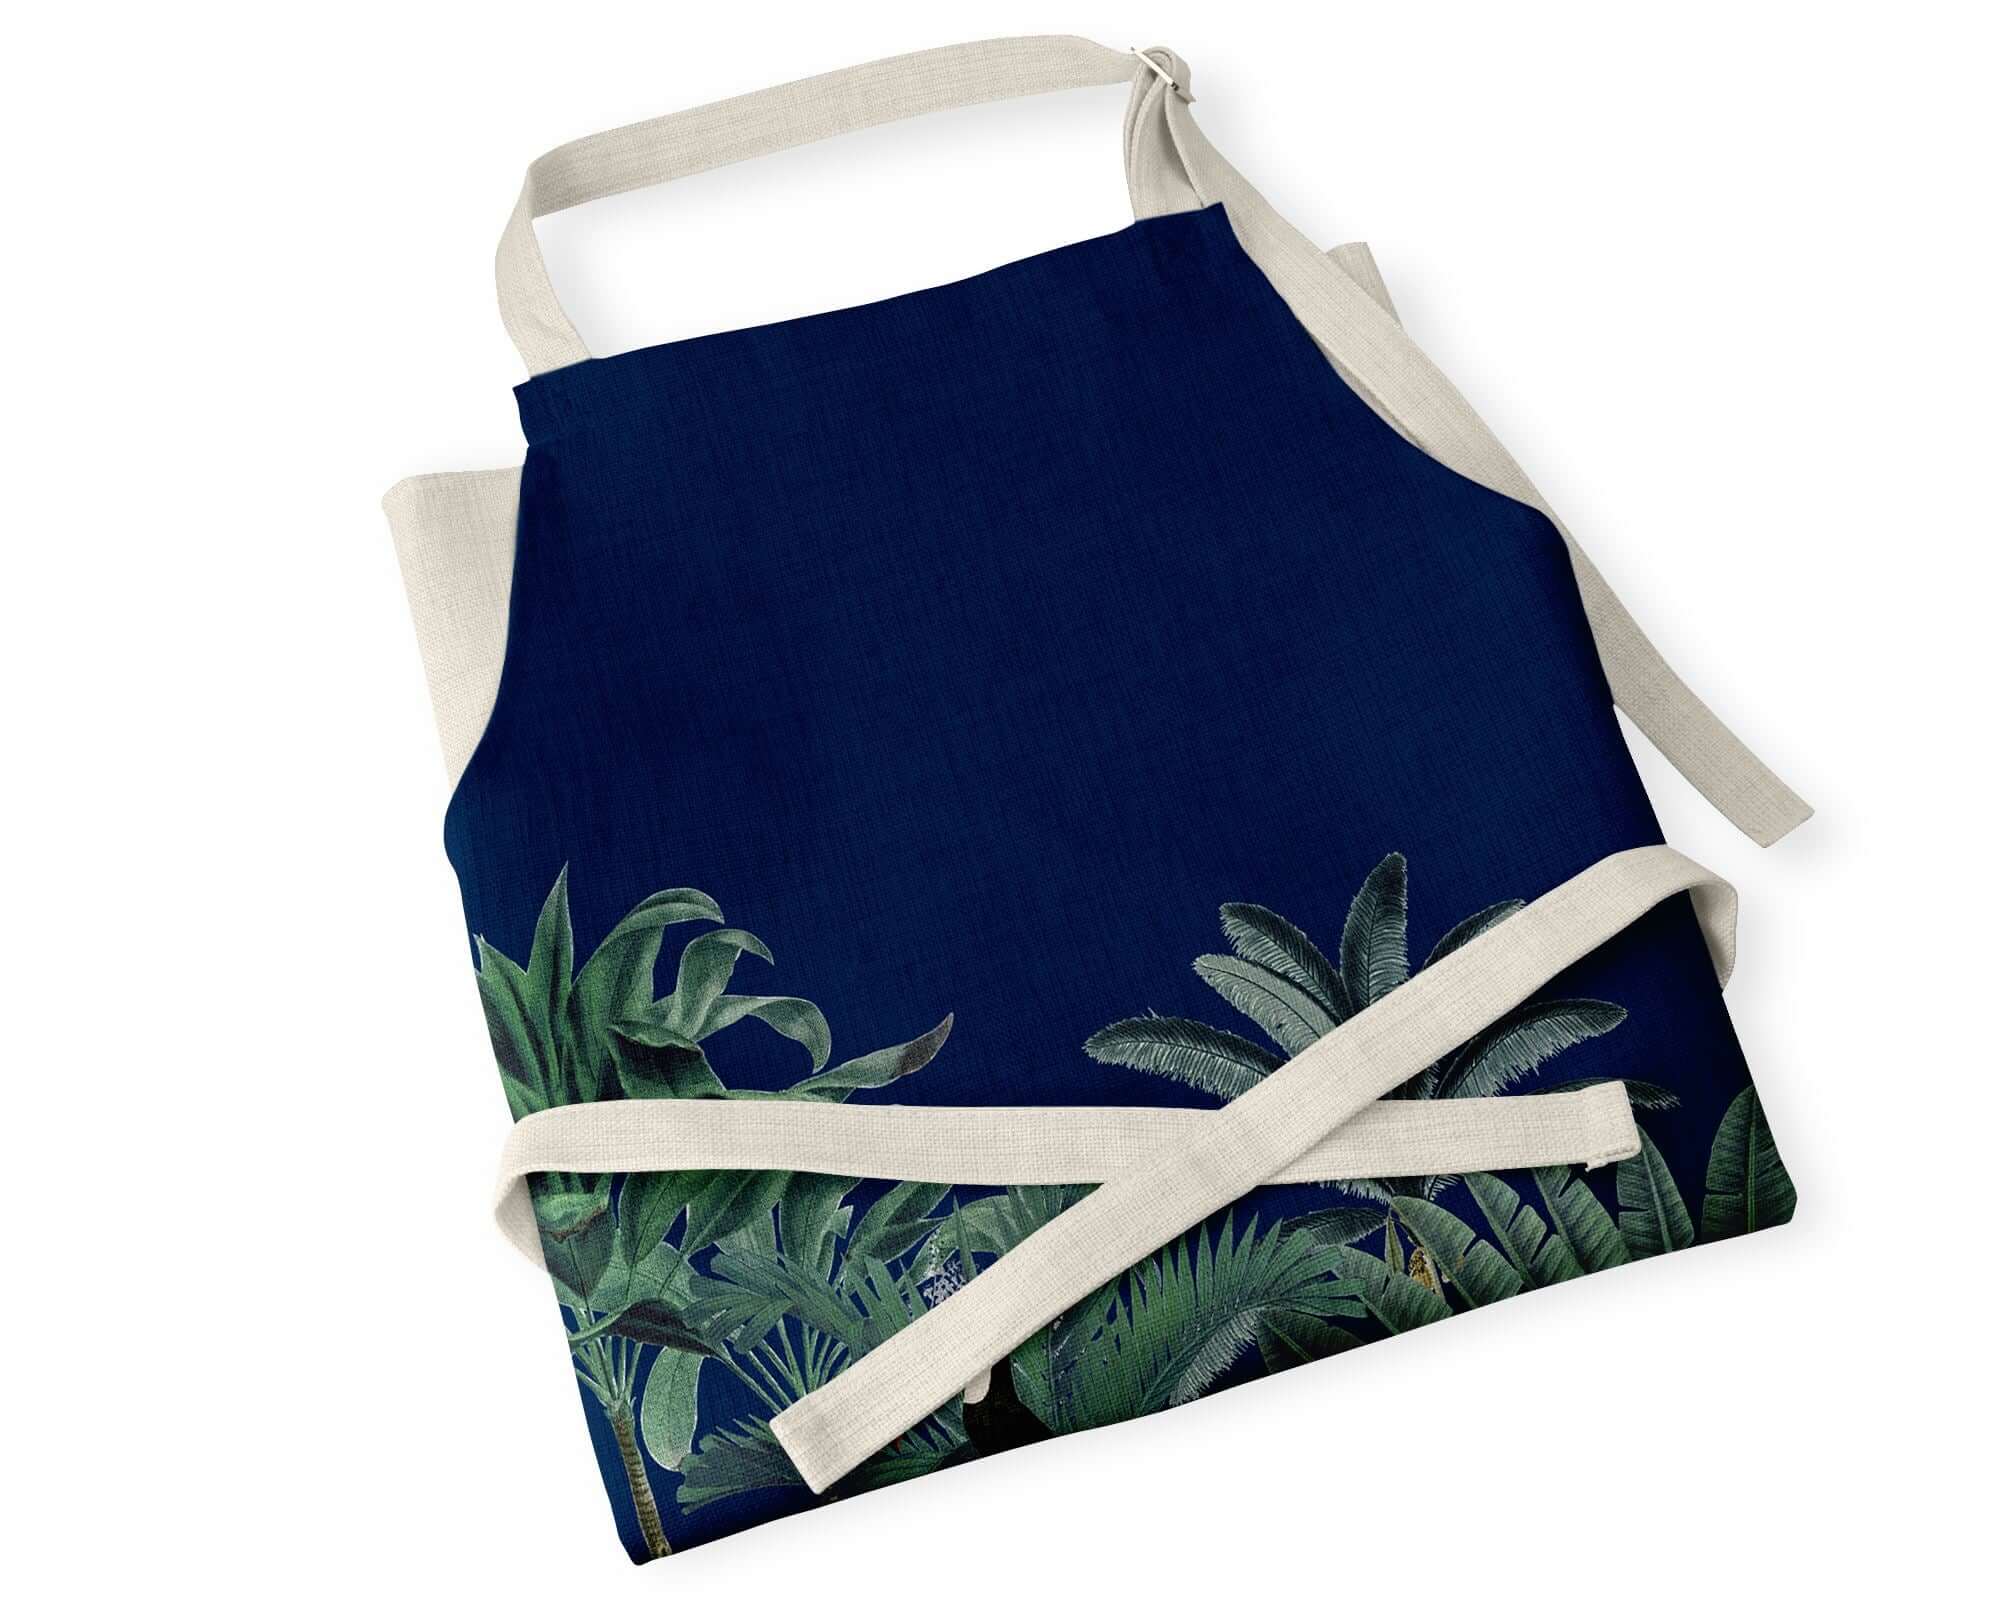 Blue Kictehn apron with Darwin's Menagerie scene including zebra, leopard, peacock and palms on bib apron from mustard and gray with contrasting neck and wasit ties